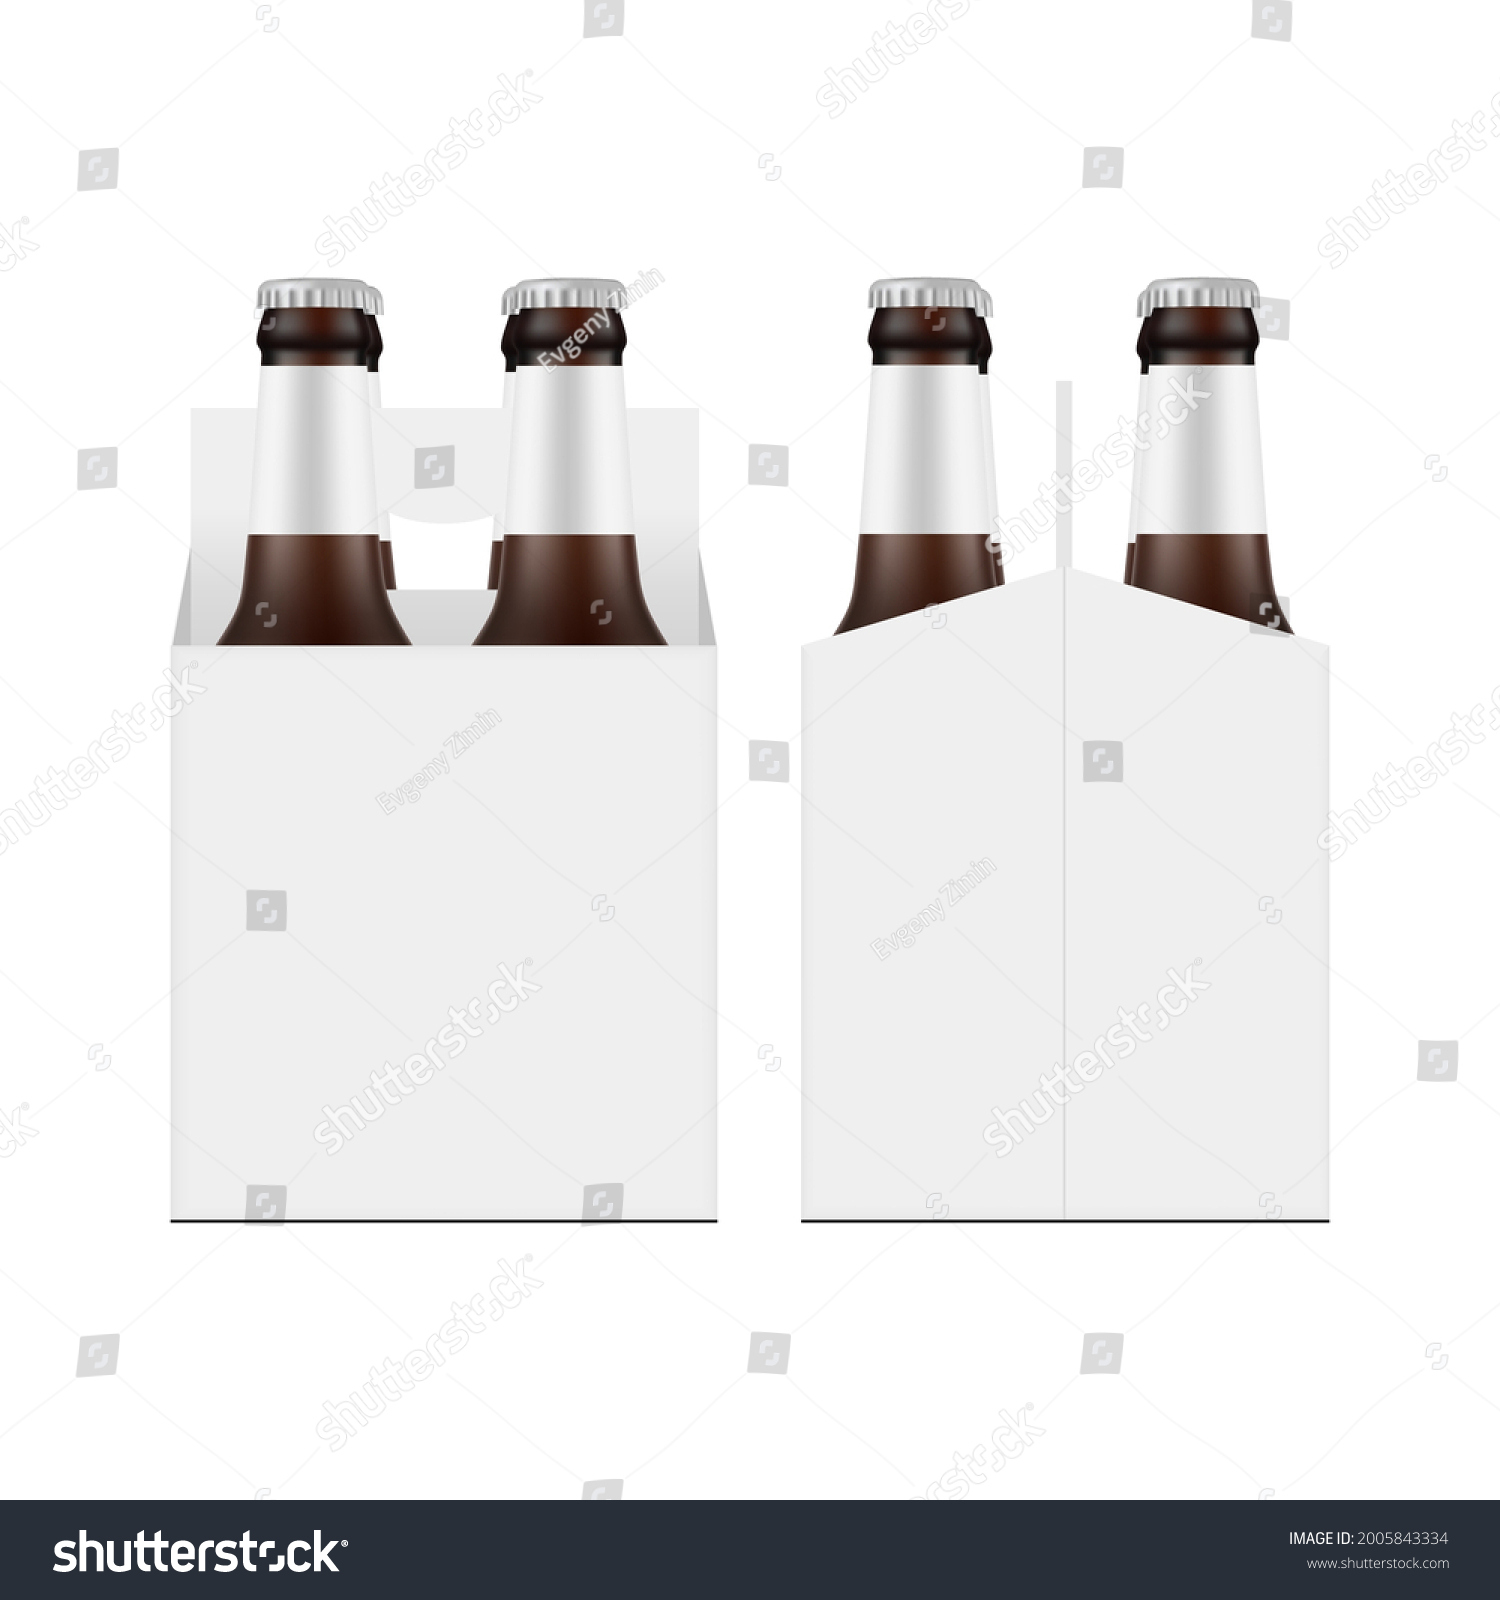 SVG of Carrier Packaging Box Mockup with Four Brown Glass Beer Bottles, Front and Side View, Isolated on White Background. Vector Illustration svg